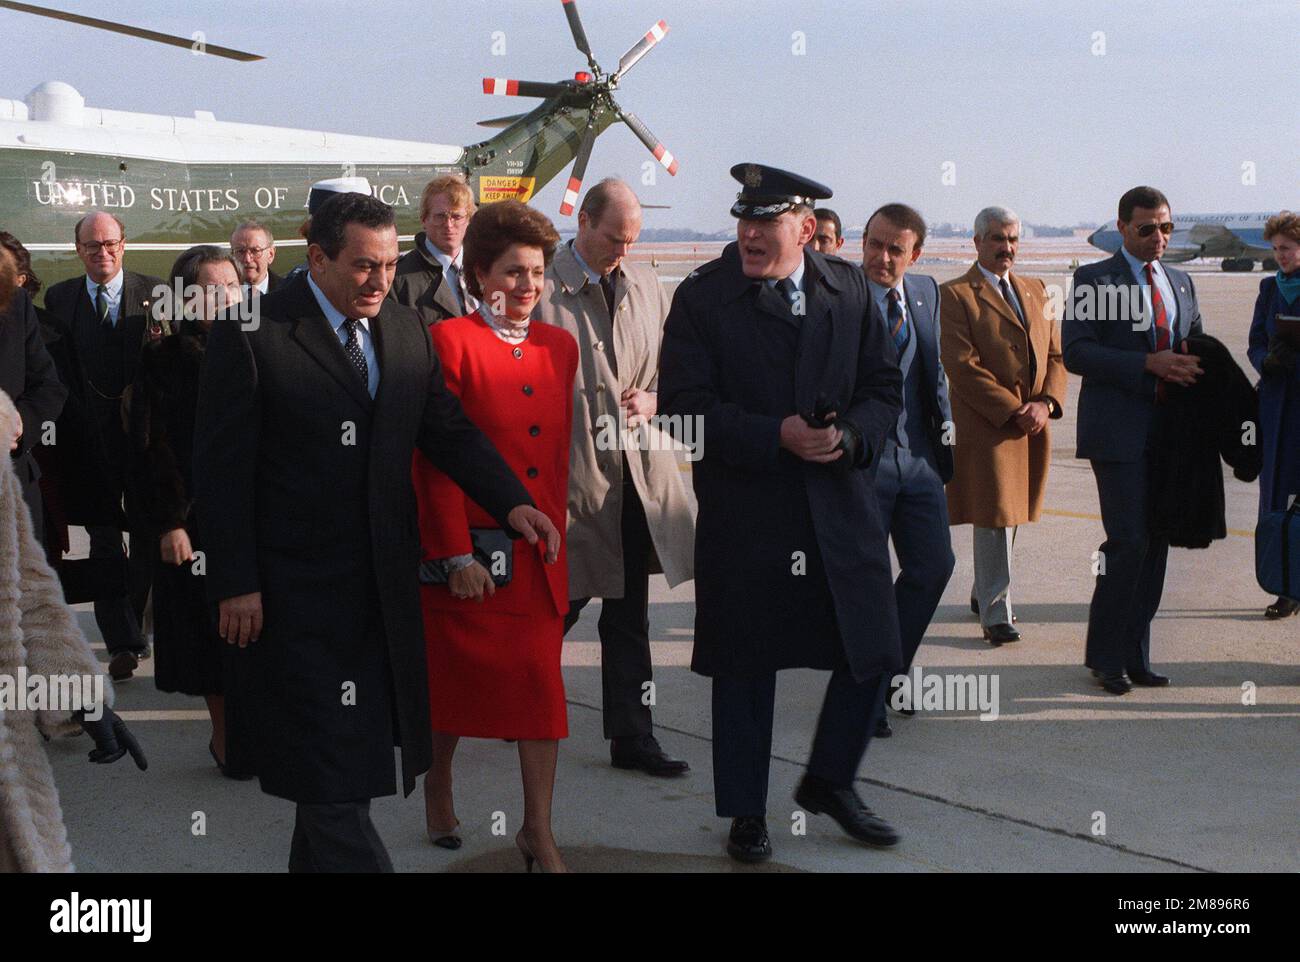 COL John Bacs, Vice Commander, Air Force District of Washington, accompanies Egyptian President Mohammed Hosni Mubarak and his wife as they walk toward the president's aircraft. The Mubaraks and their party have come to the base to begin their journey back to Egypt following a state visit. A Marine Helicopter Squadron 1 (HMX-1) VH-3D Sea King helicopter is in the background. Base: Andrews Air Force Base State: Maryland (MD) Country: United States Of America (USA) Stock Photo